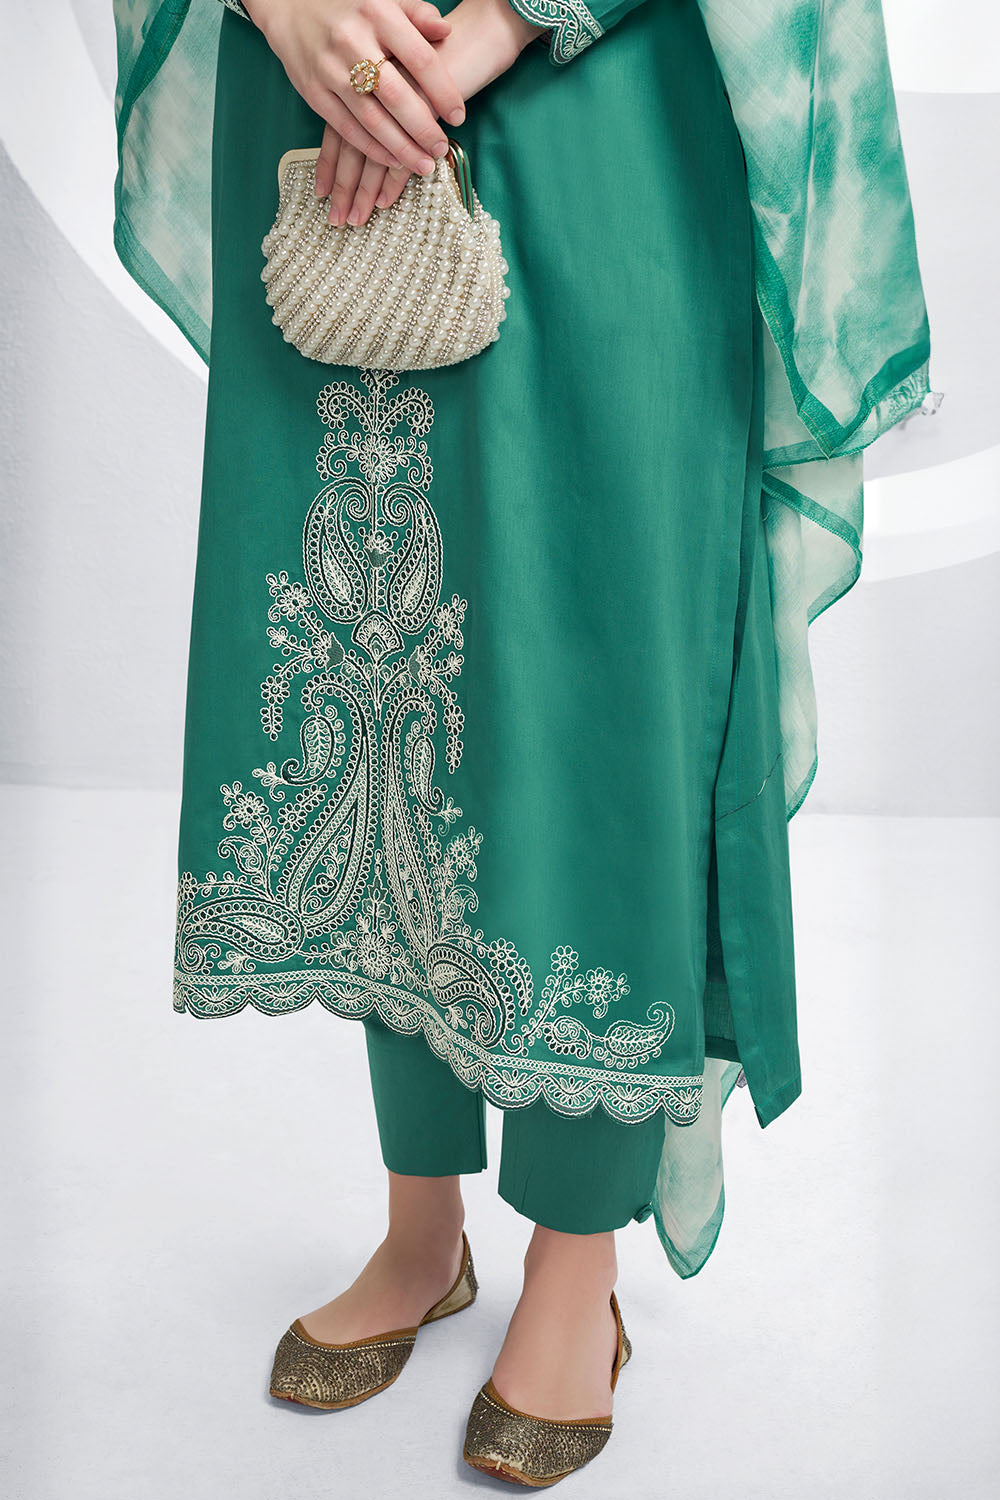 Teal Color Cotton Hemline Embroidered Unstitched Suit Material